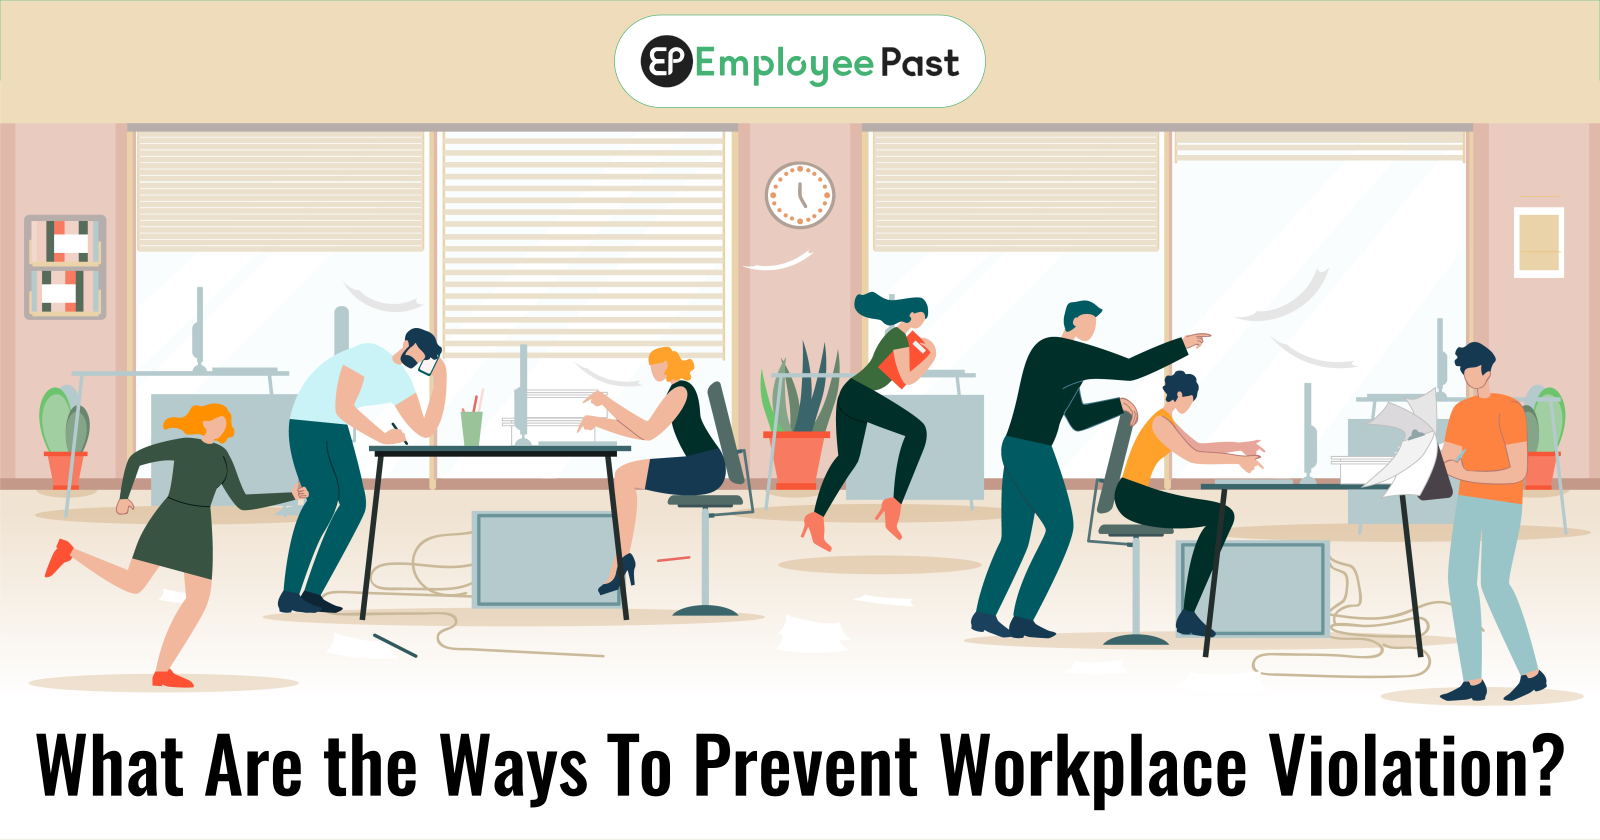 What Are the Ways To Prevent Workplace Violation?